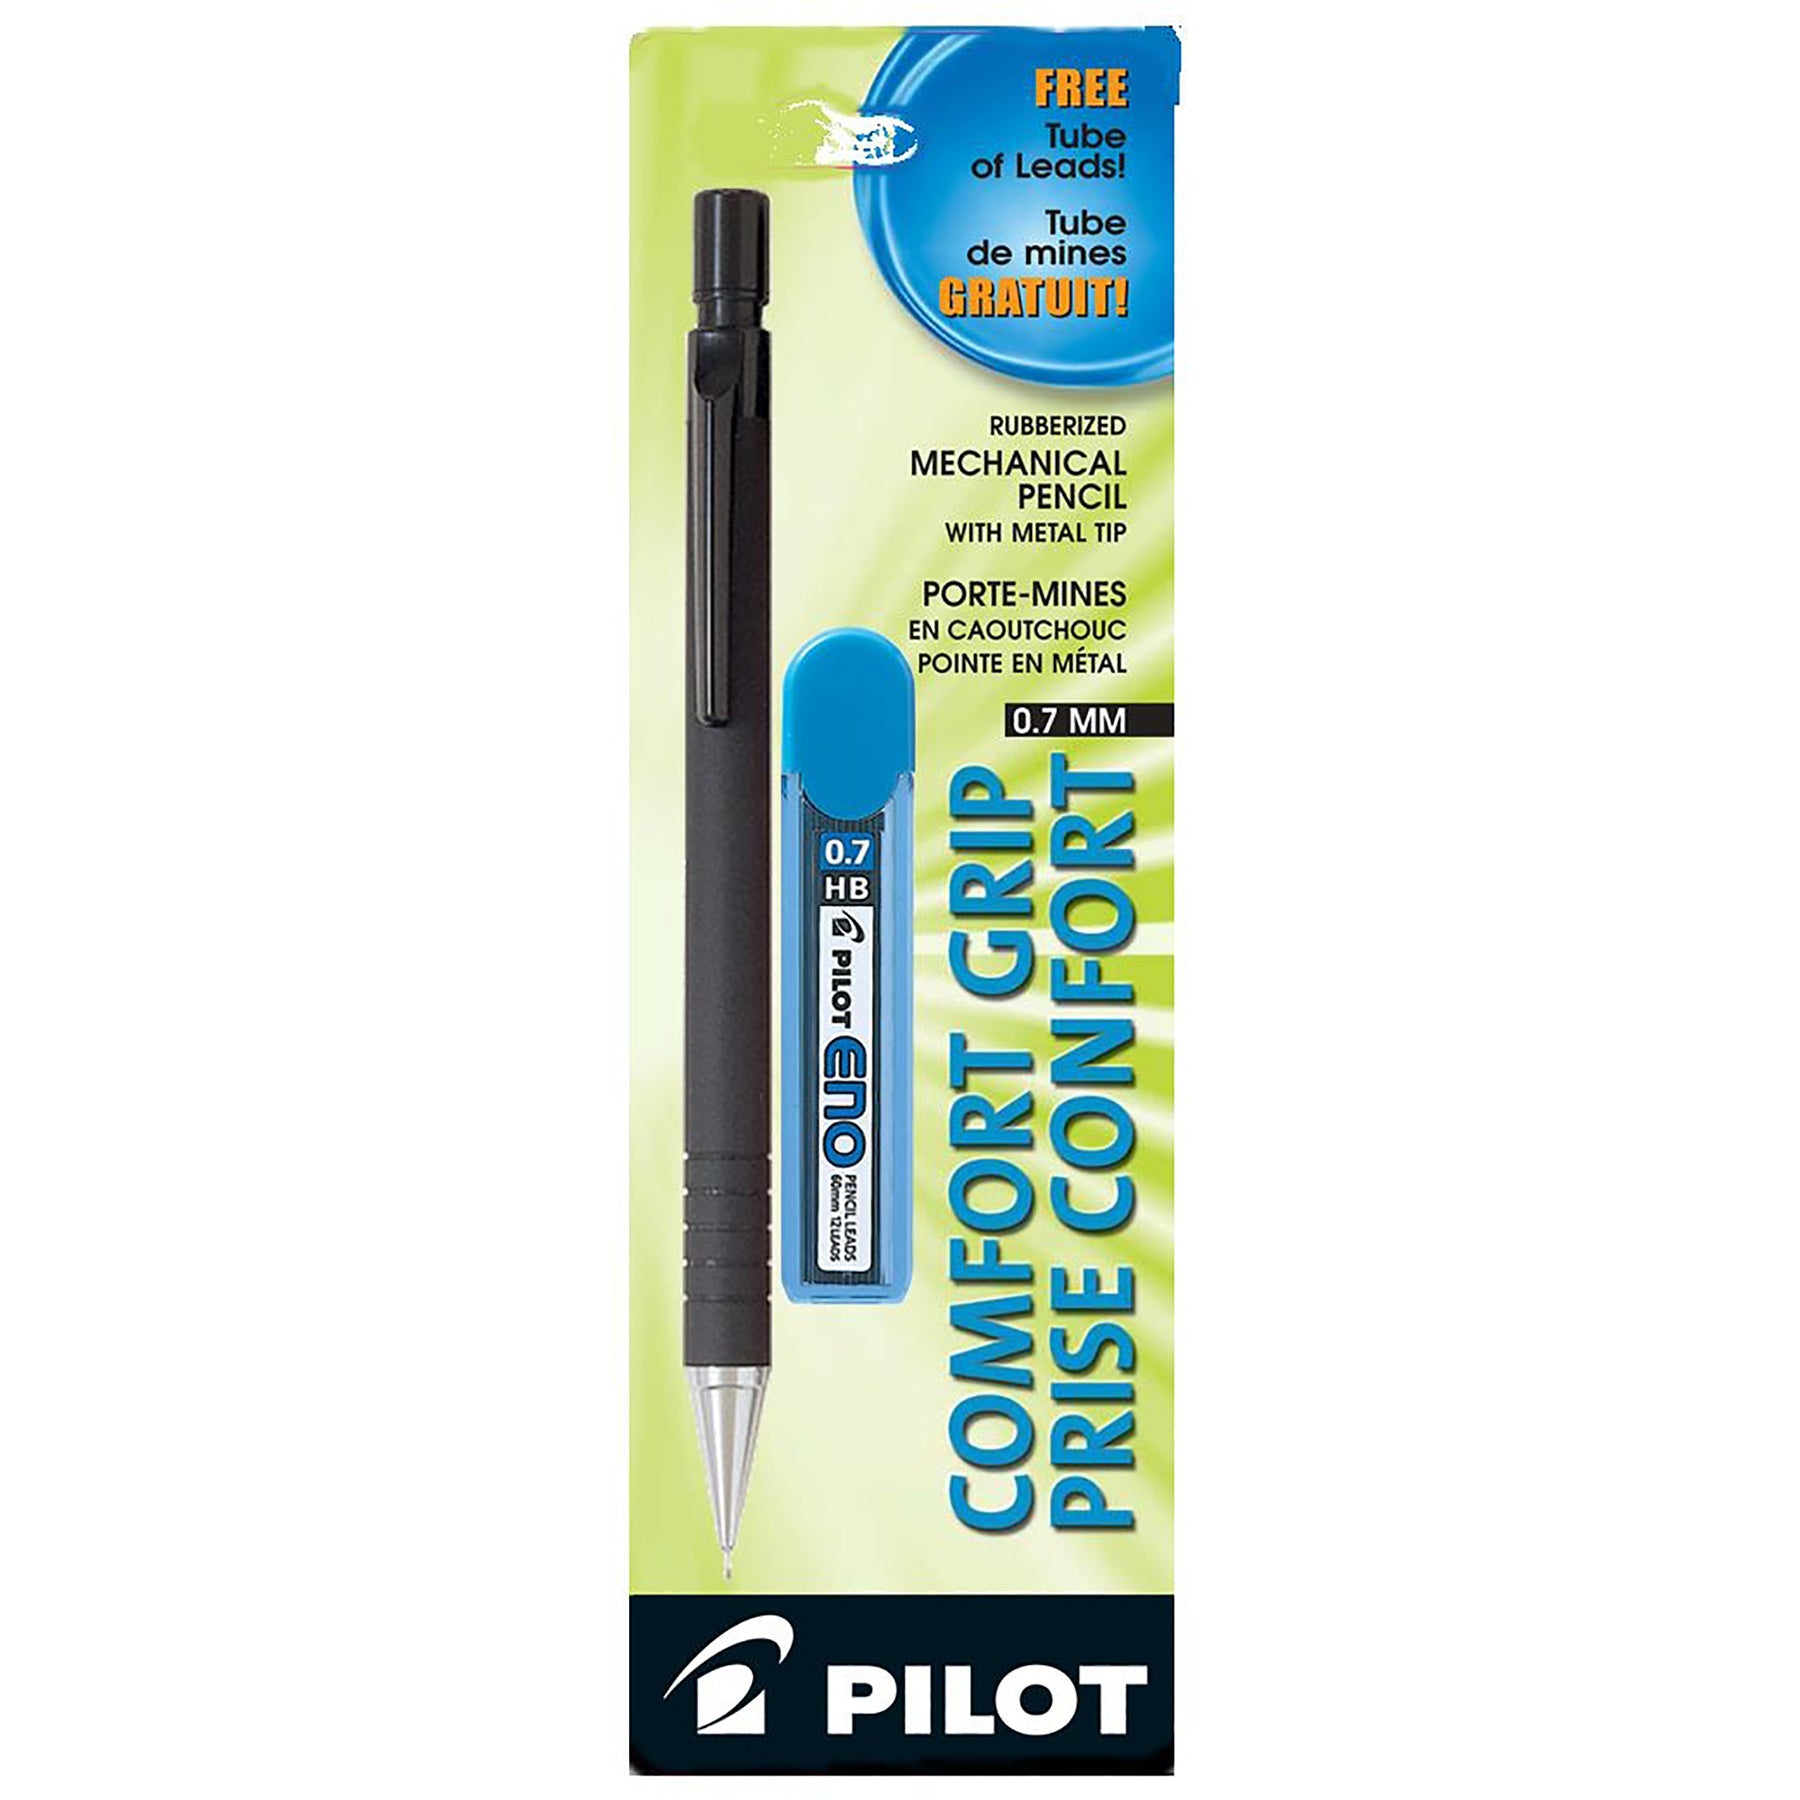 Pilot Mechanical Pencil with Leads 0.7mm